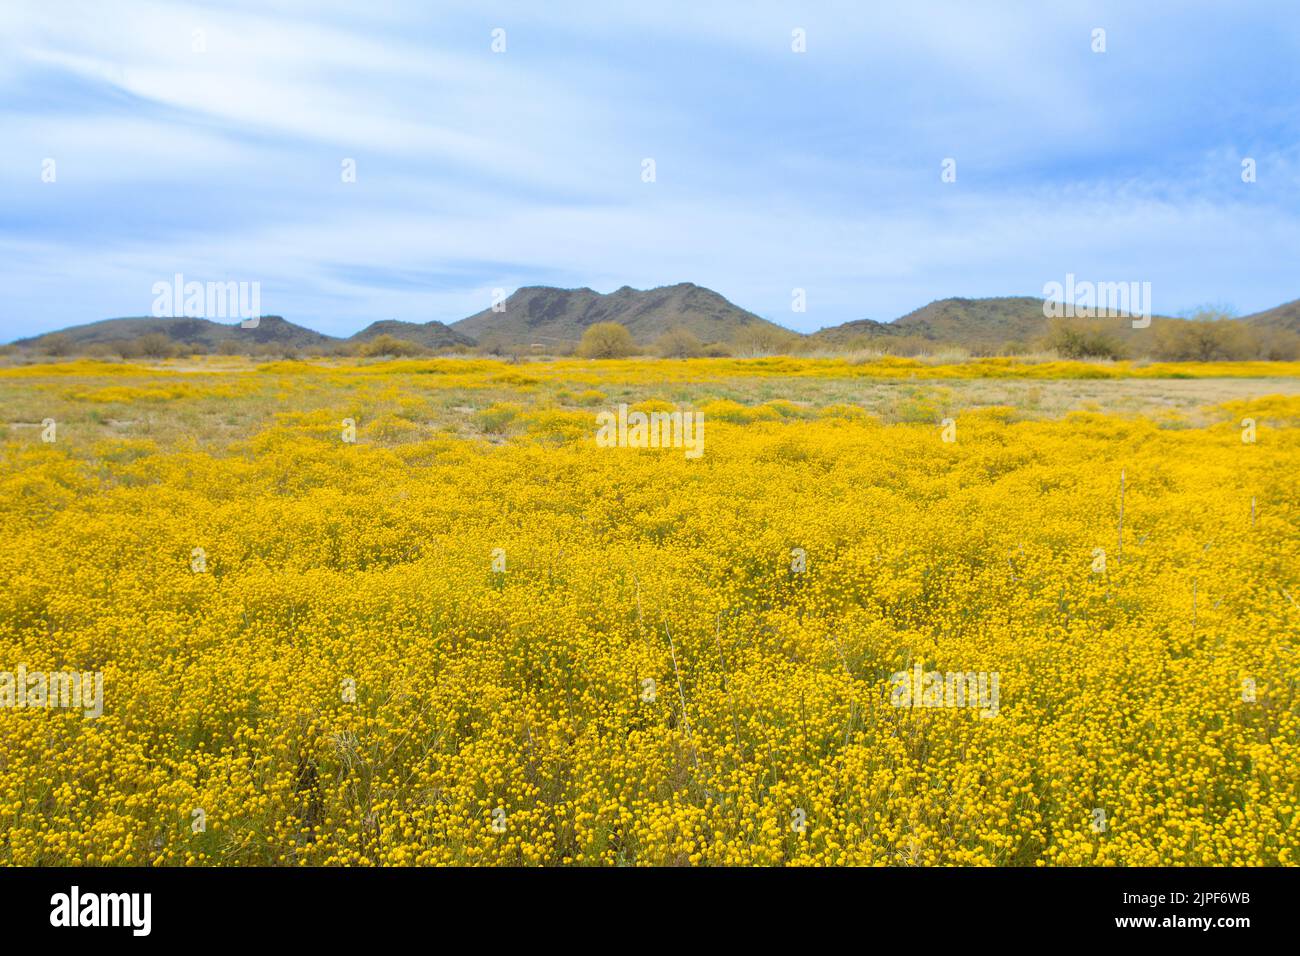 The Brass Buttons (Cotula coronopifolia) plant are blooming in the spring. Yellow wild flowers blooming in the meadow with mountain backgroun. Stock Photo